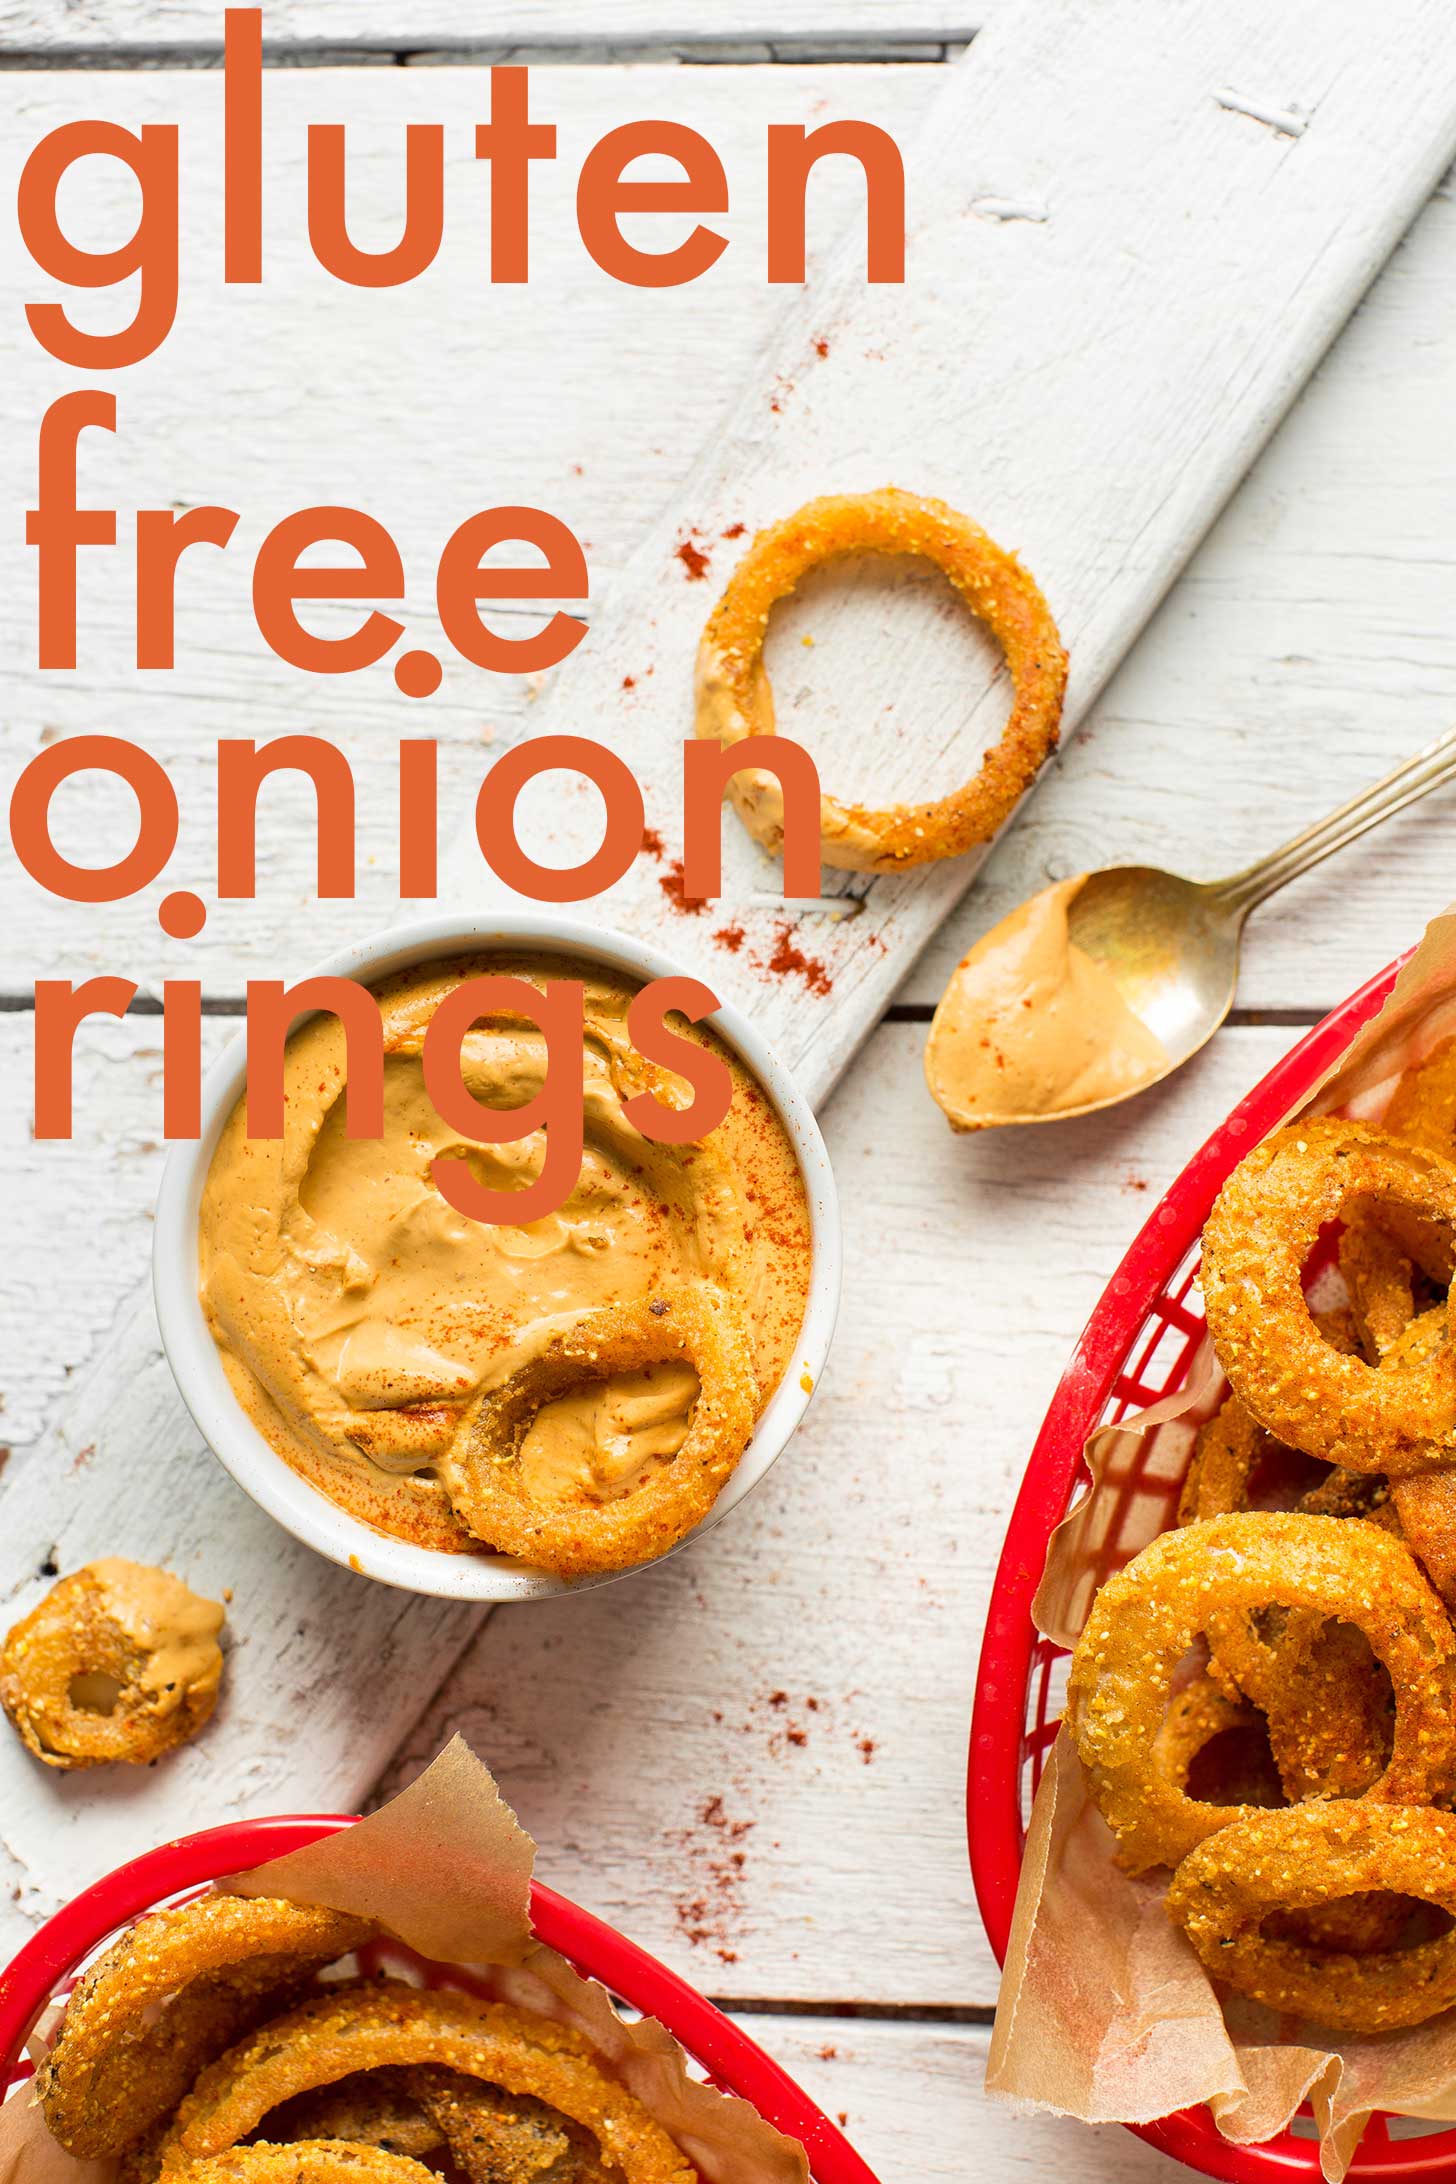 Containers of gluten-free onion rings with Vegan Chipotle Aioli